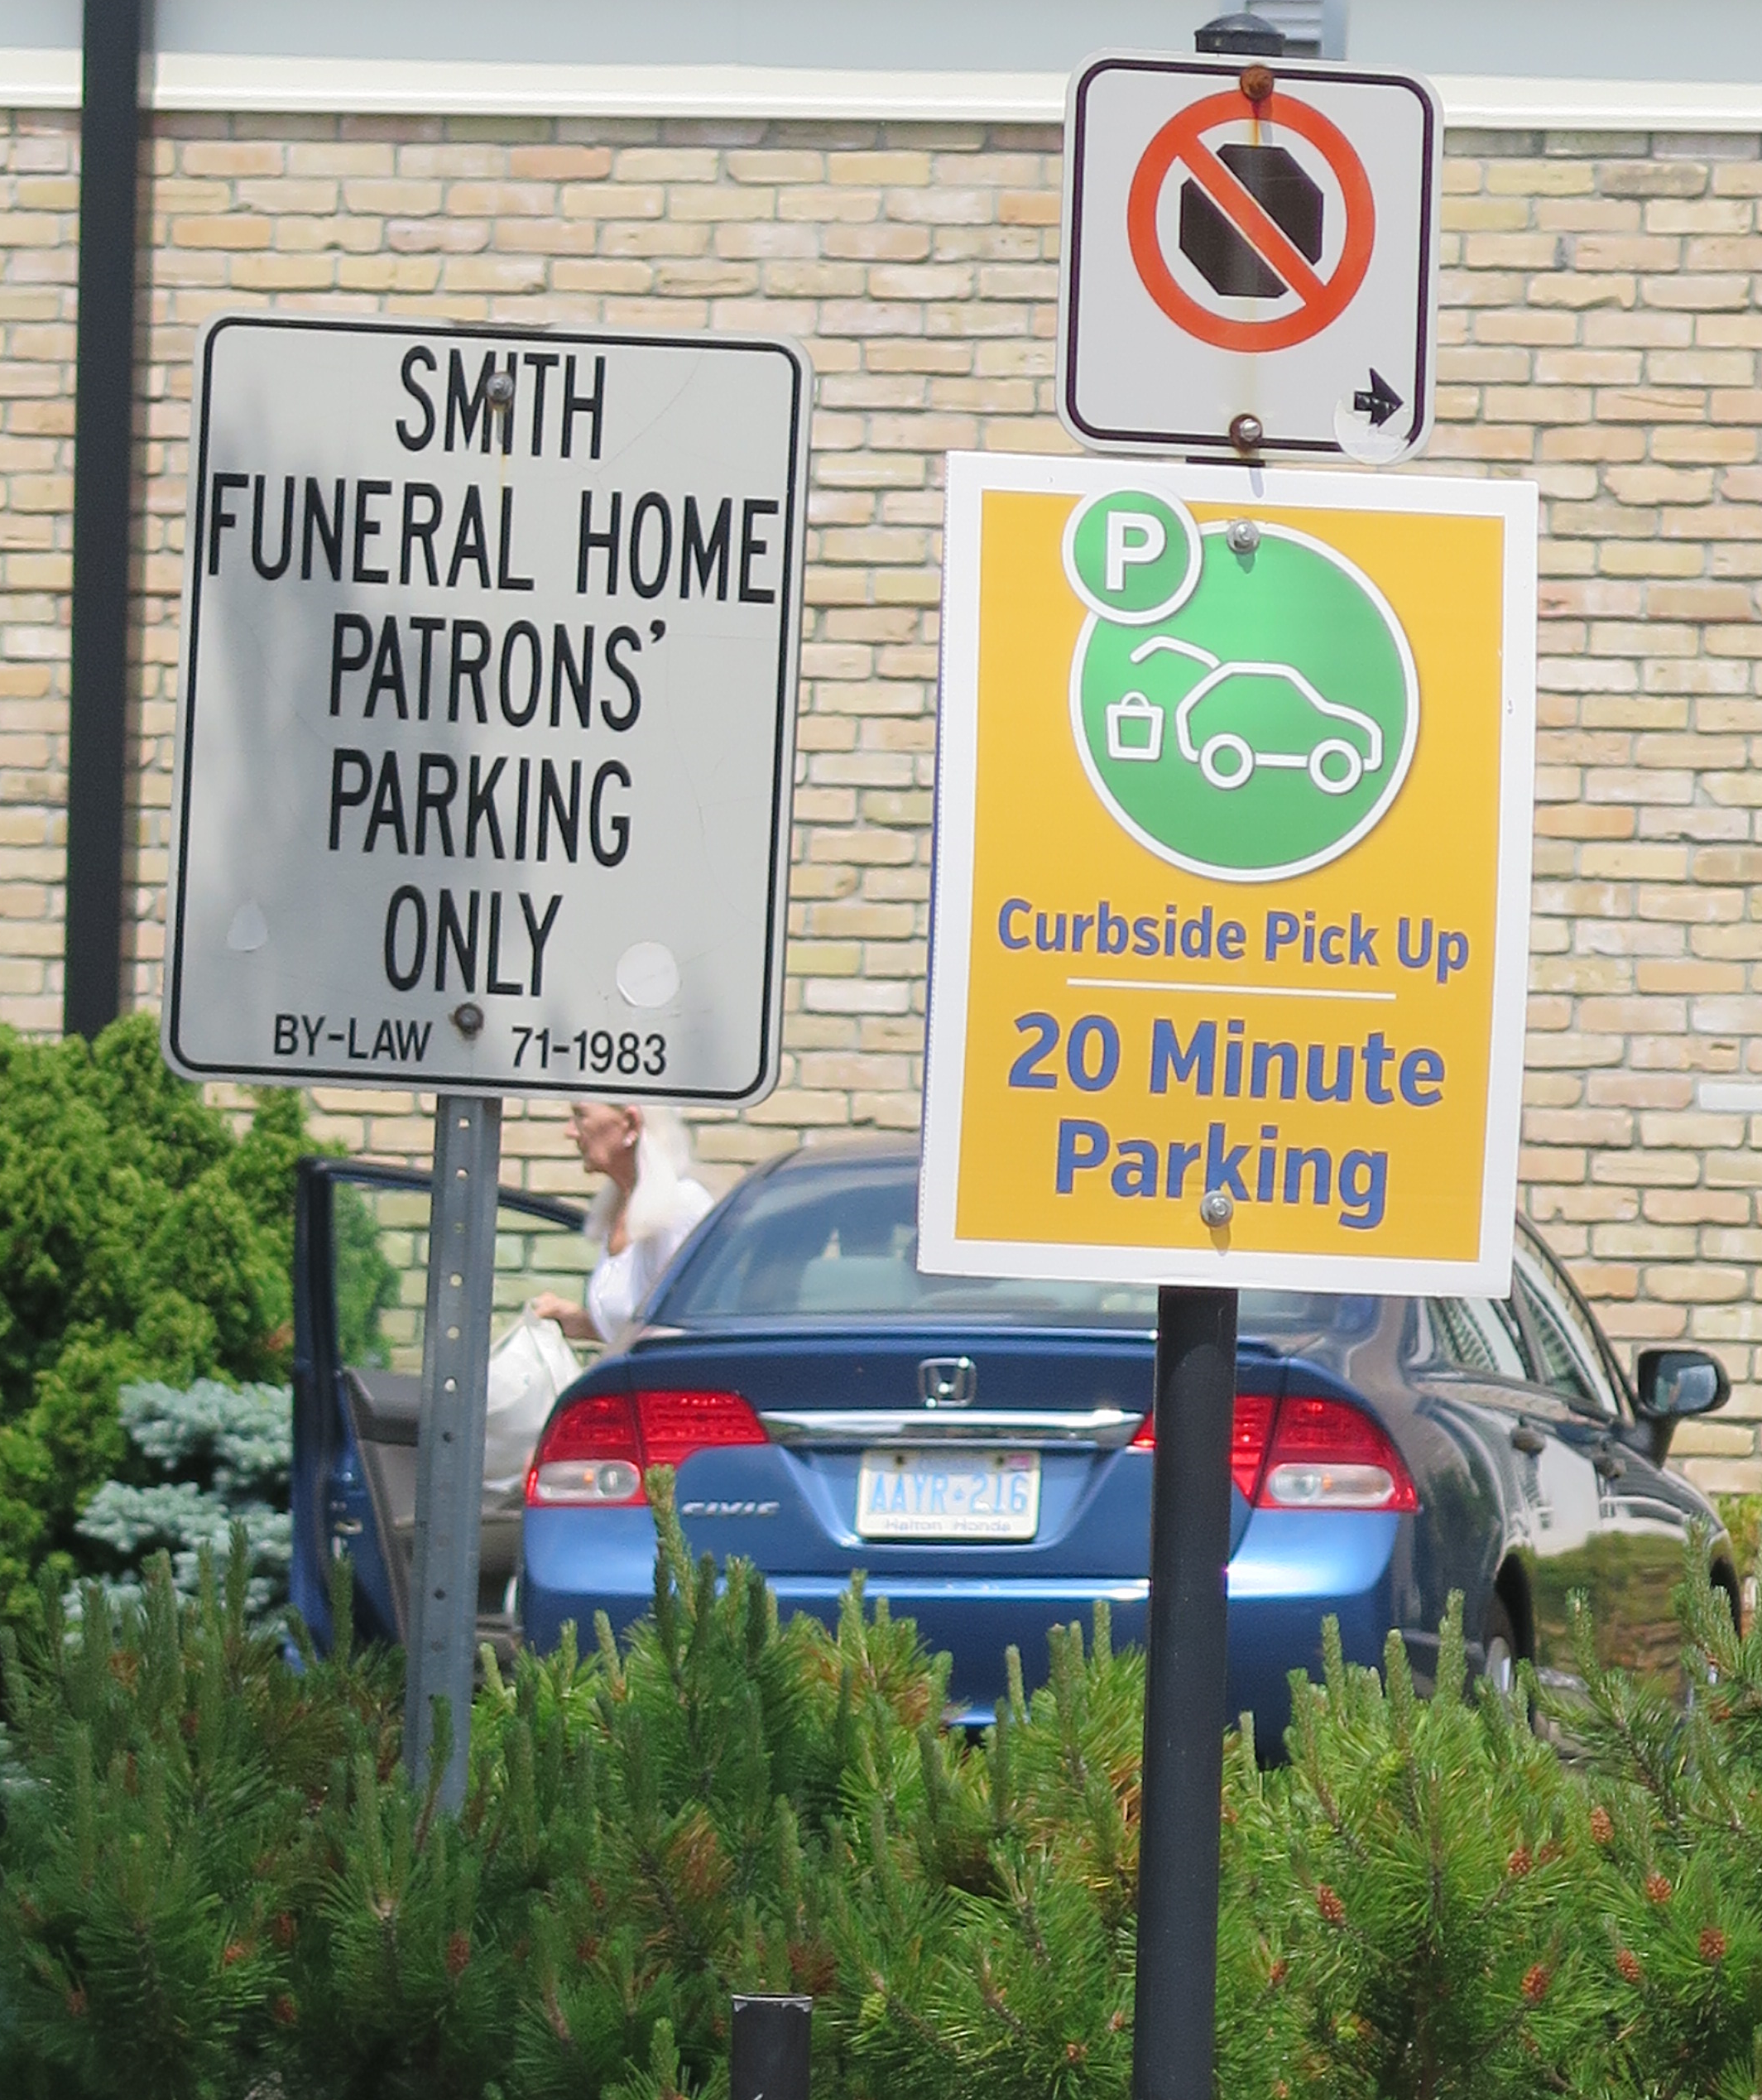 Smith Funeral Home curb side